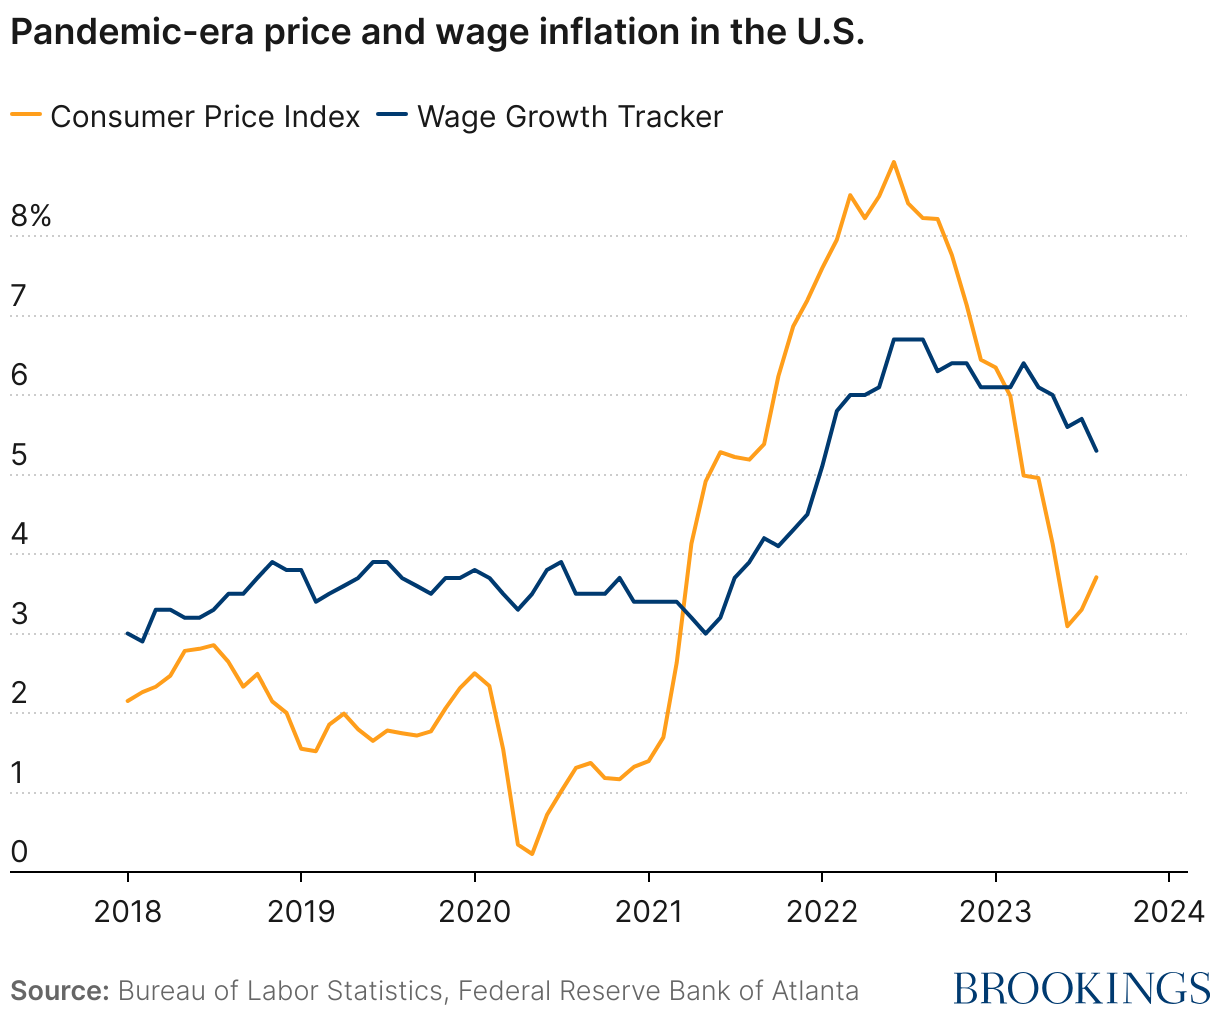 Wage growth lagged behind inflation in 2021 and 2022 but has now surpassed inflation. 